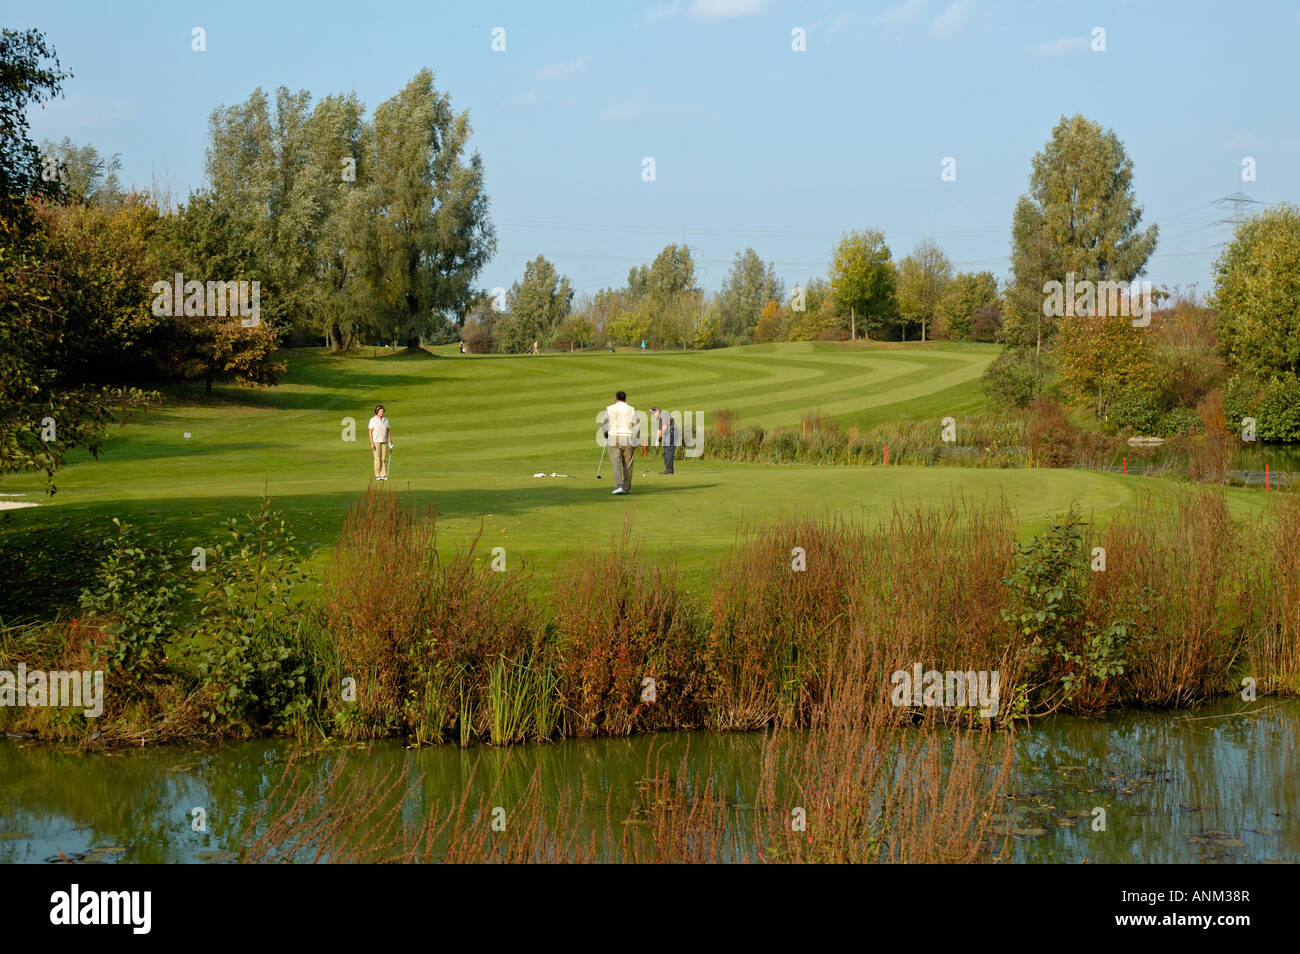 Golfers on golf course green next to water. Stock Photo